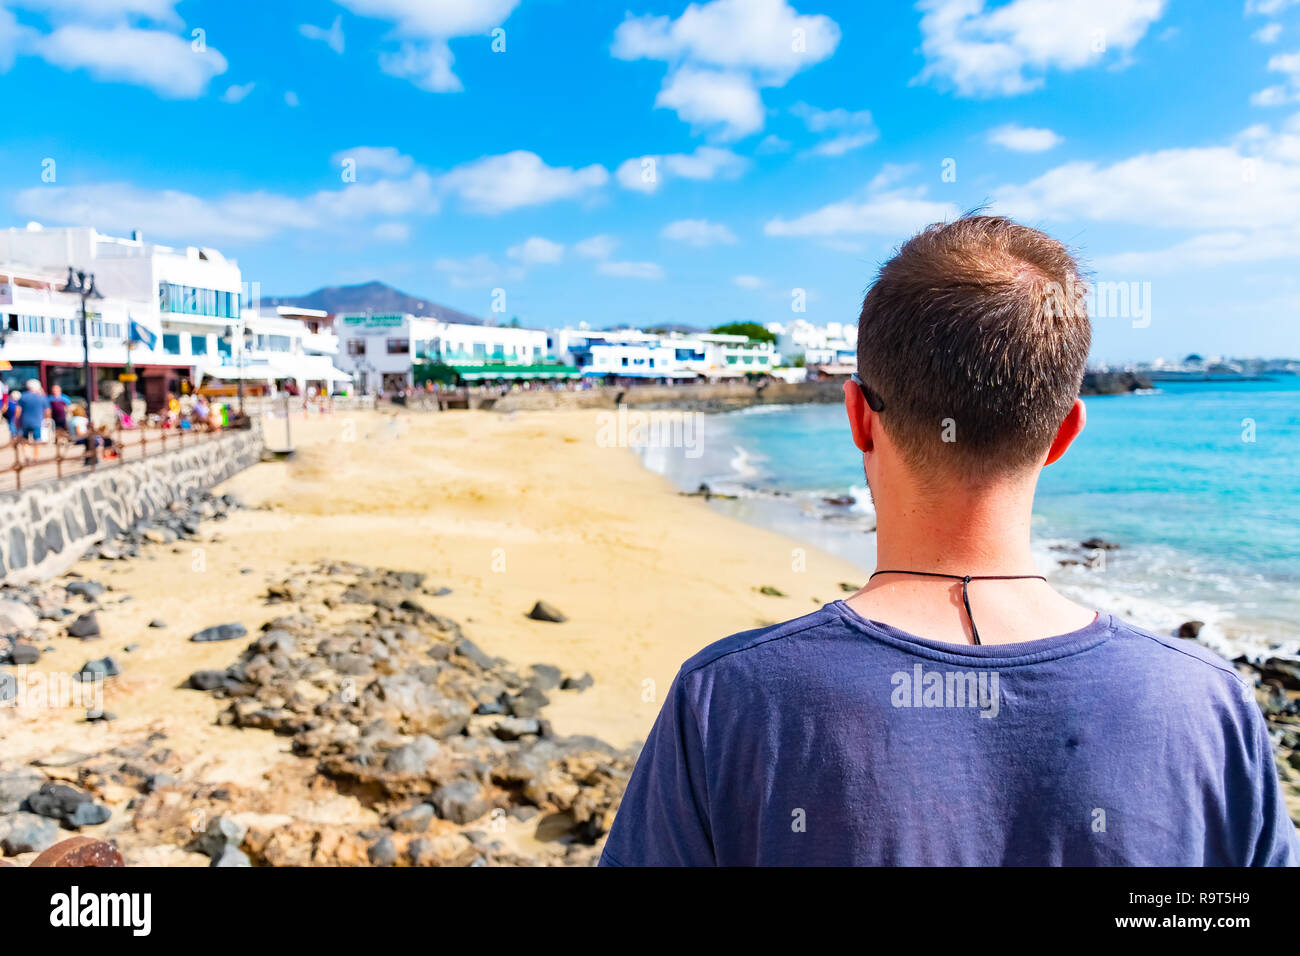 A man looking at seaside promenade in Playa Blanca, the former fishermens village became a main touristic spot with opening of the new harbor, Lanzaro Stock Photo